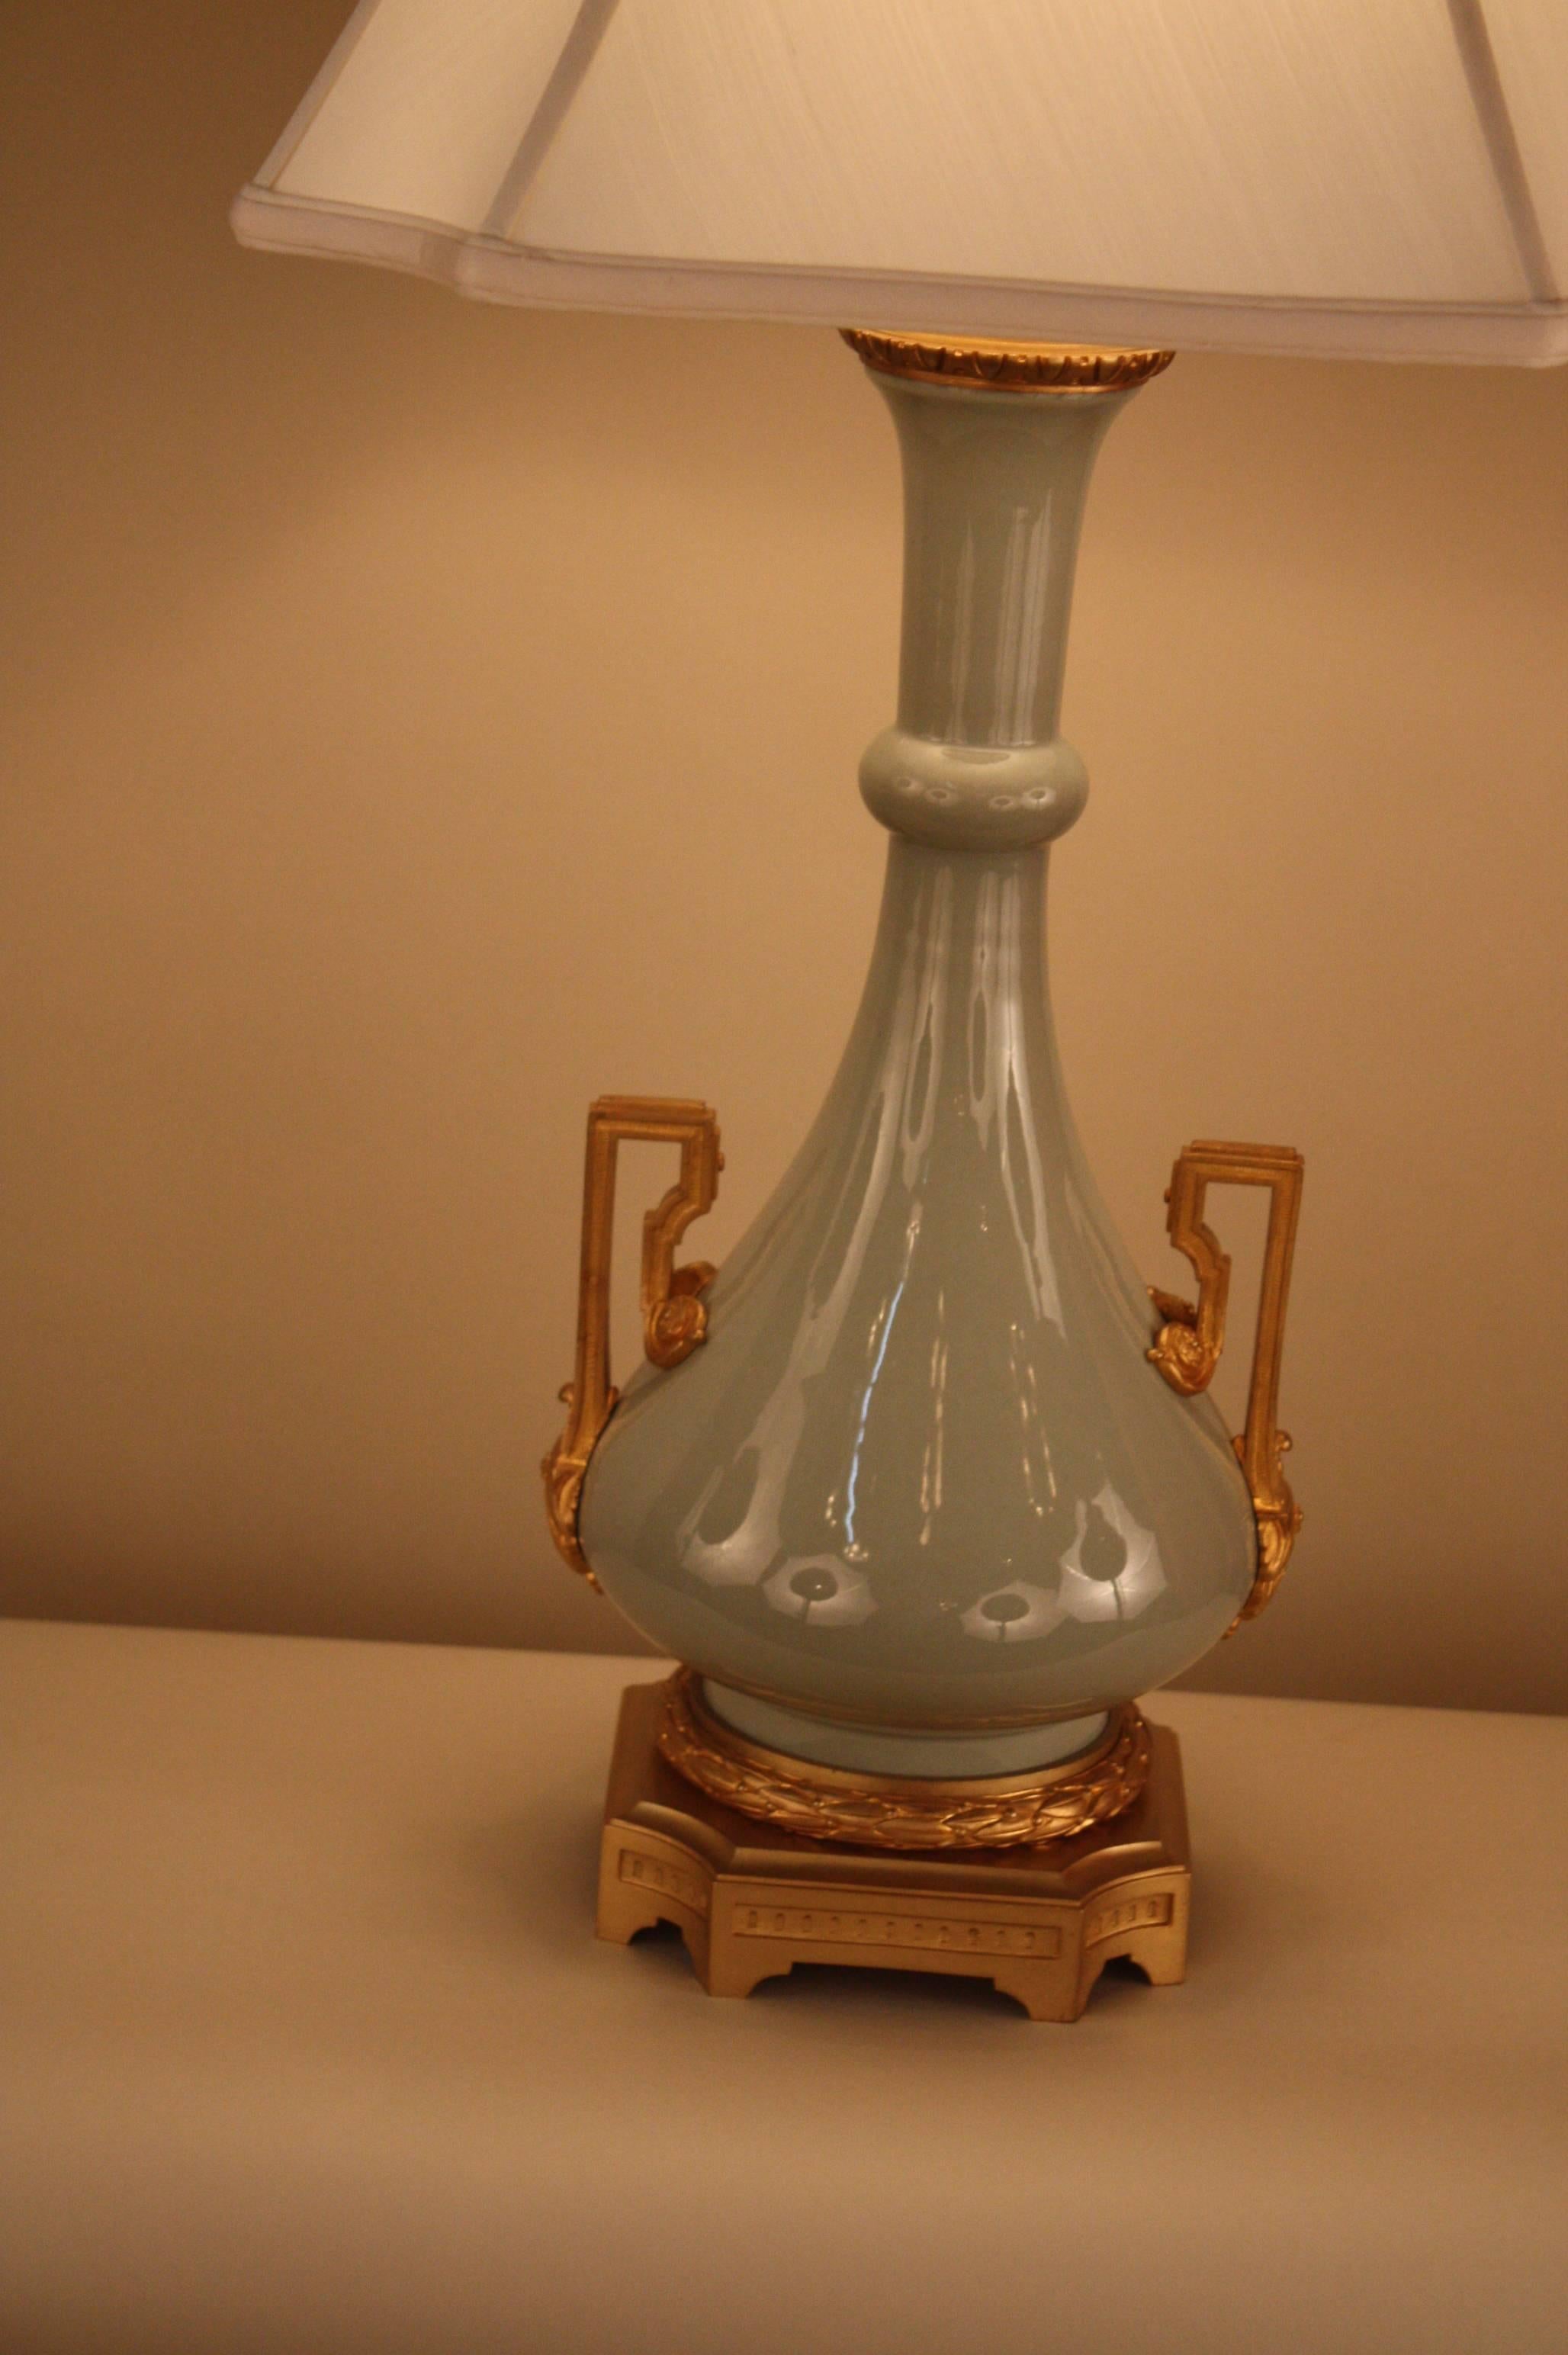 Elegant 19th century soft celadon color electrified porcelain oil lamp with fantastic bronze base and hard ware by famous Parisian lighting co of Gagneau & Co.